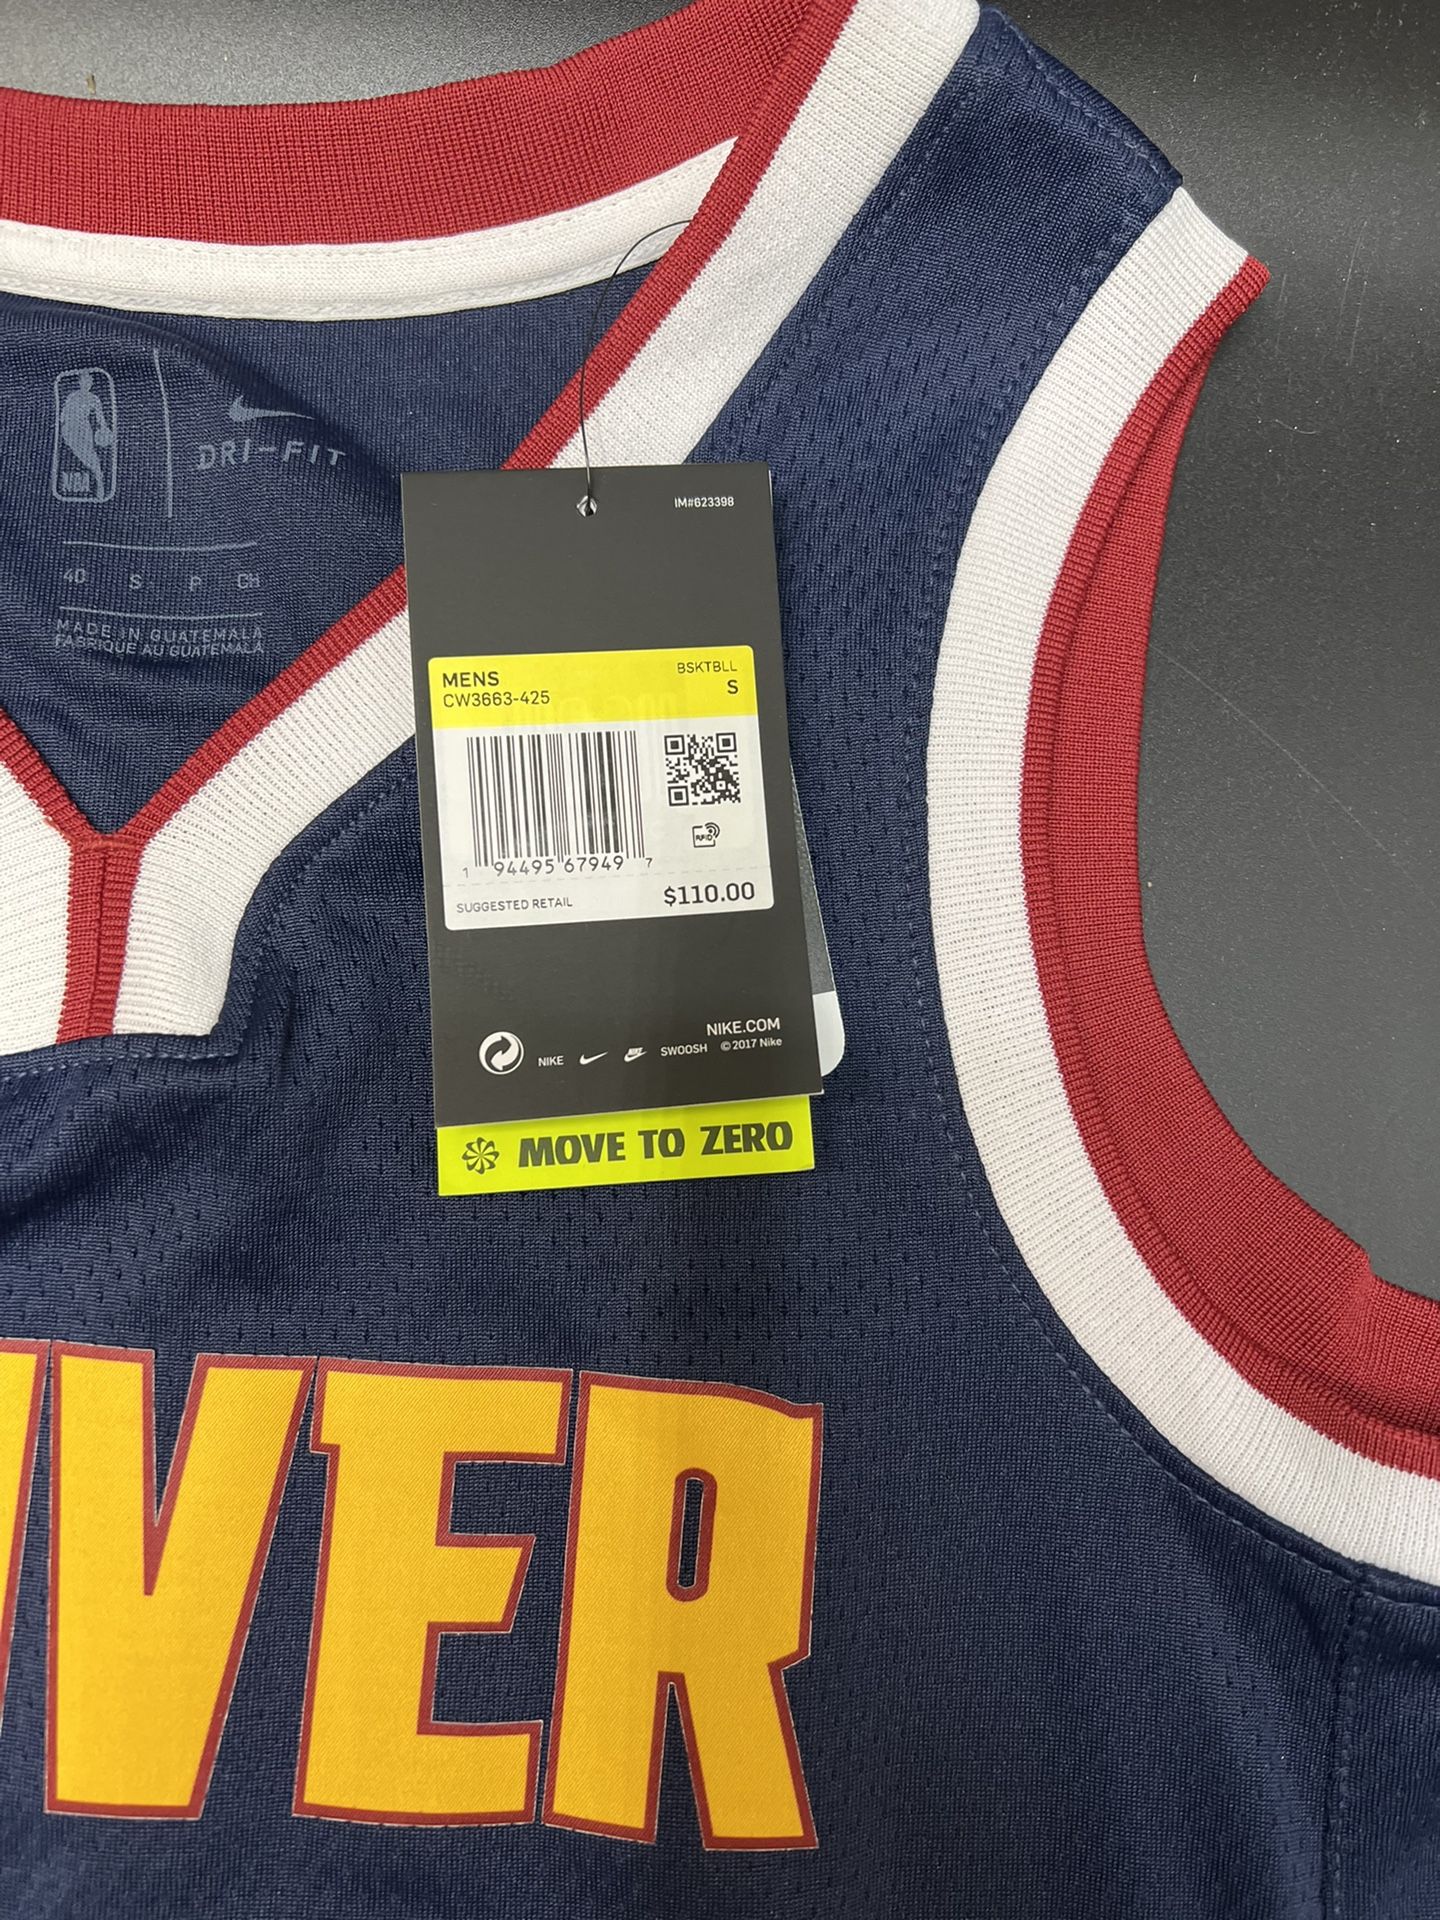 authentic nba store jamal murray jersey with tags for Sale in Redwood City,  CA - OfferUp